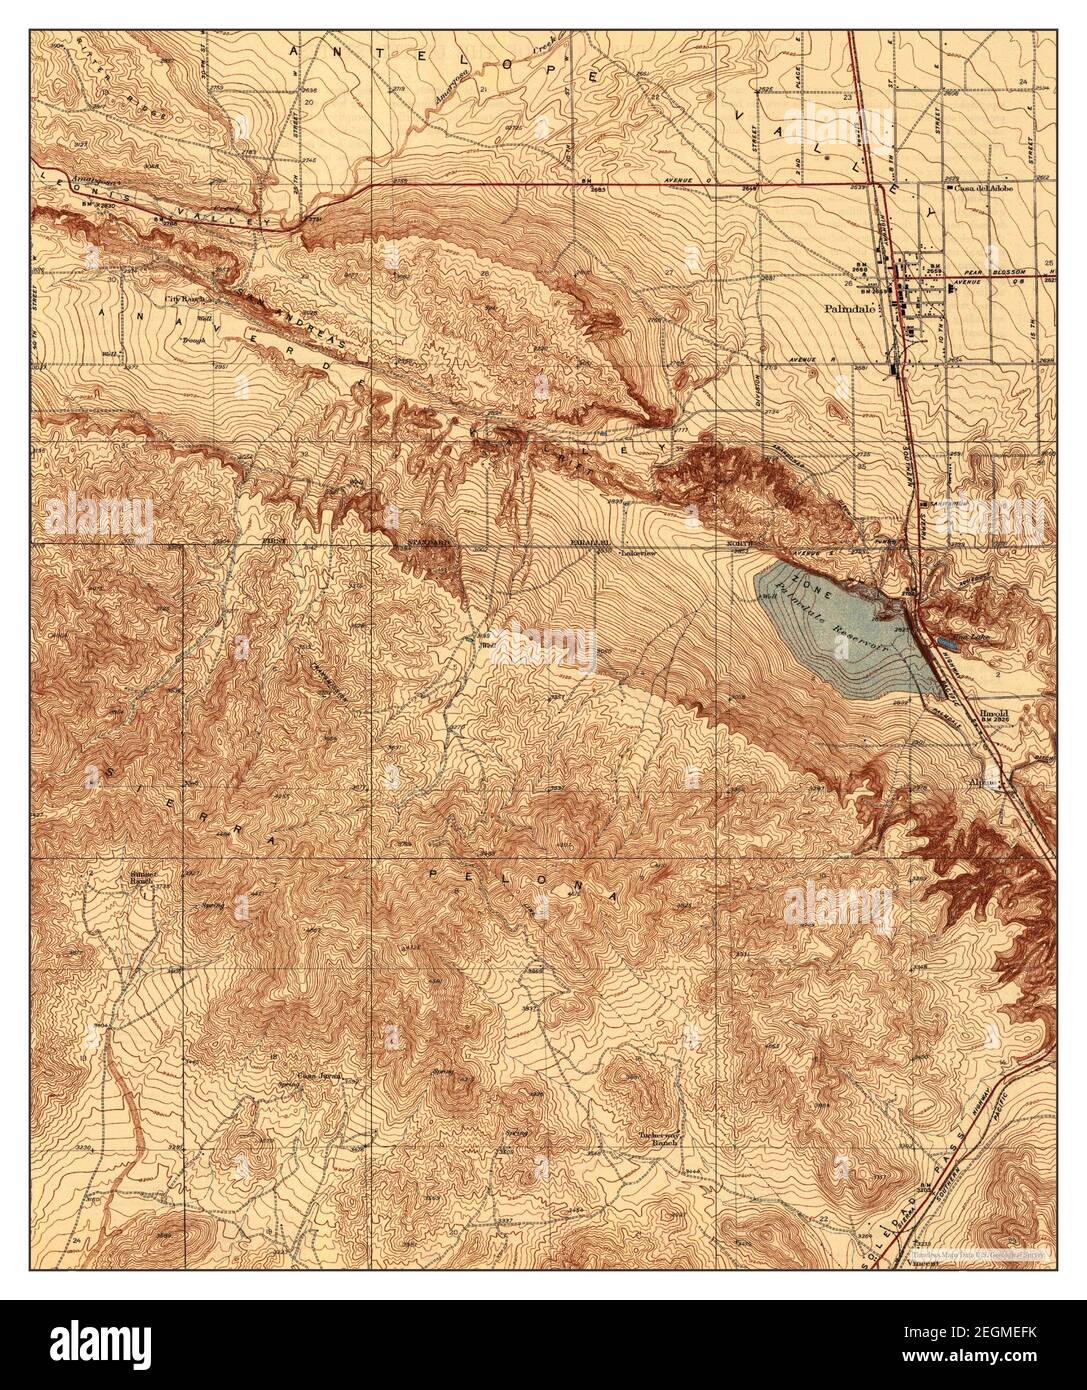 Palmdale, California, map 1937, 1:24000, United States of America by Timeless Maps, data U.S. Geological Survey Stock Photo